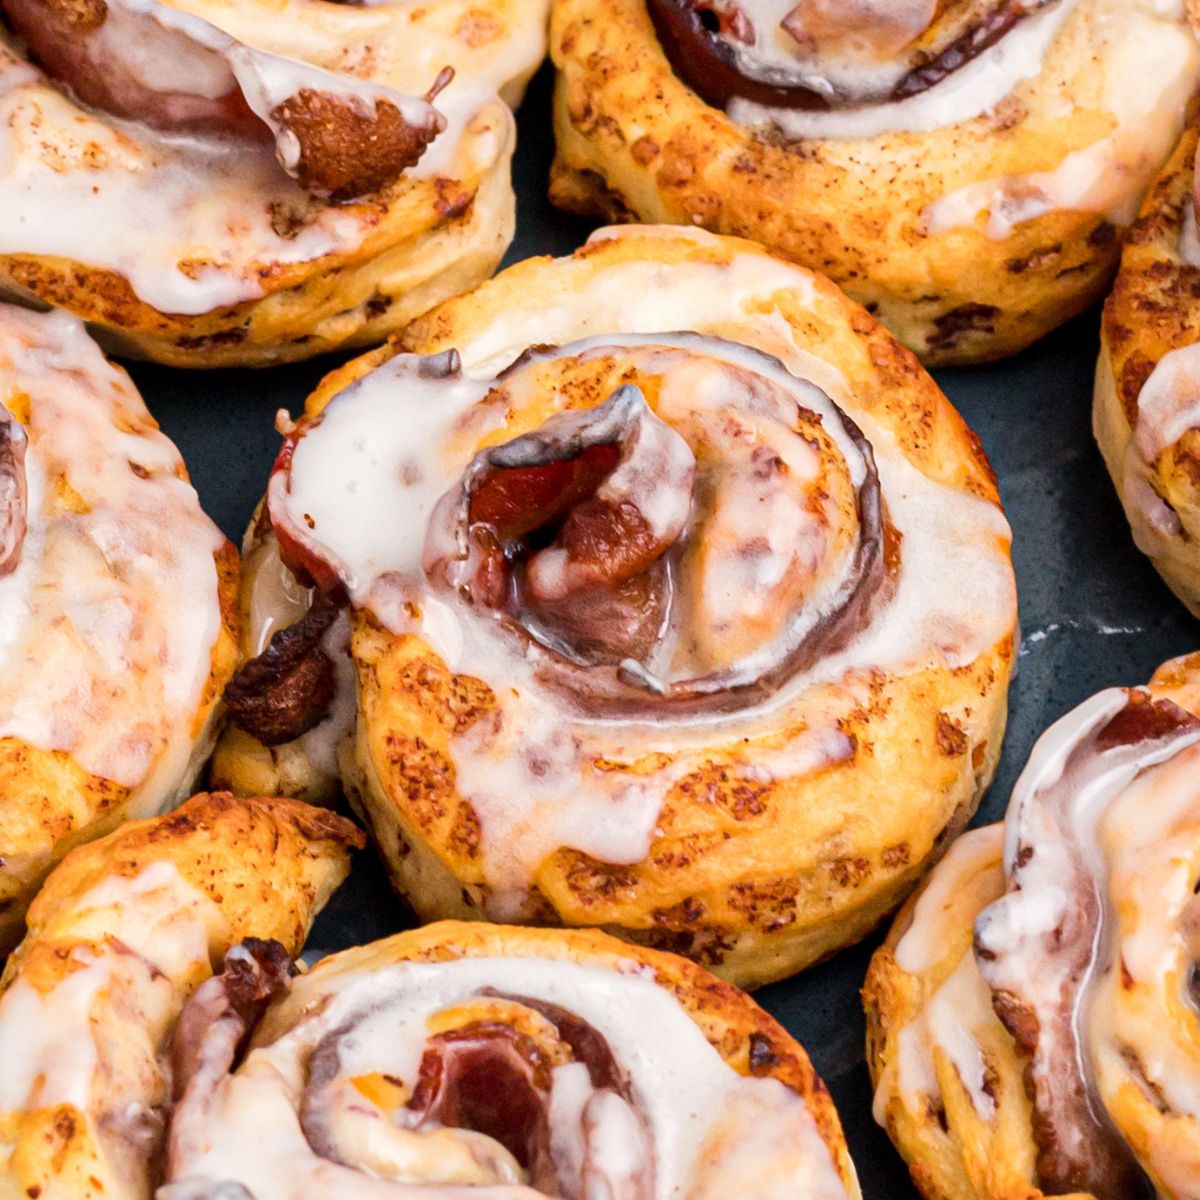 Golden cinnamon rolls air fried around a slice of bacon